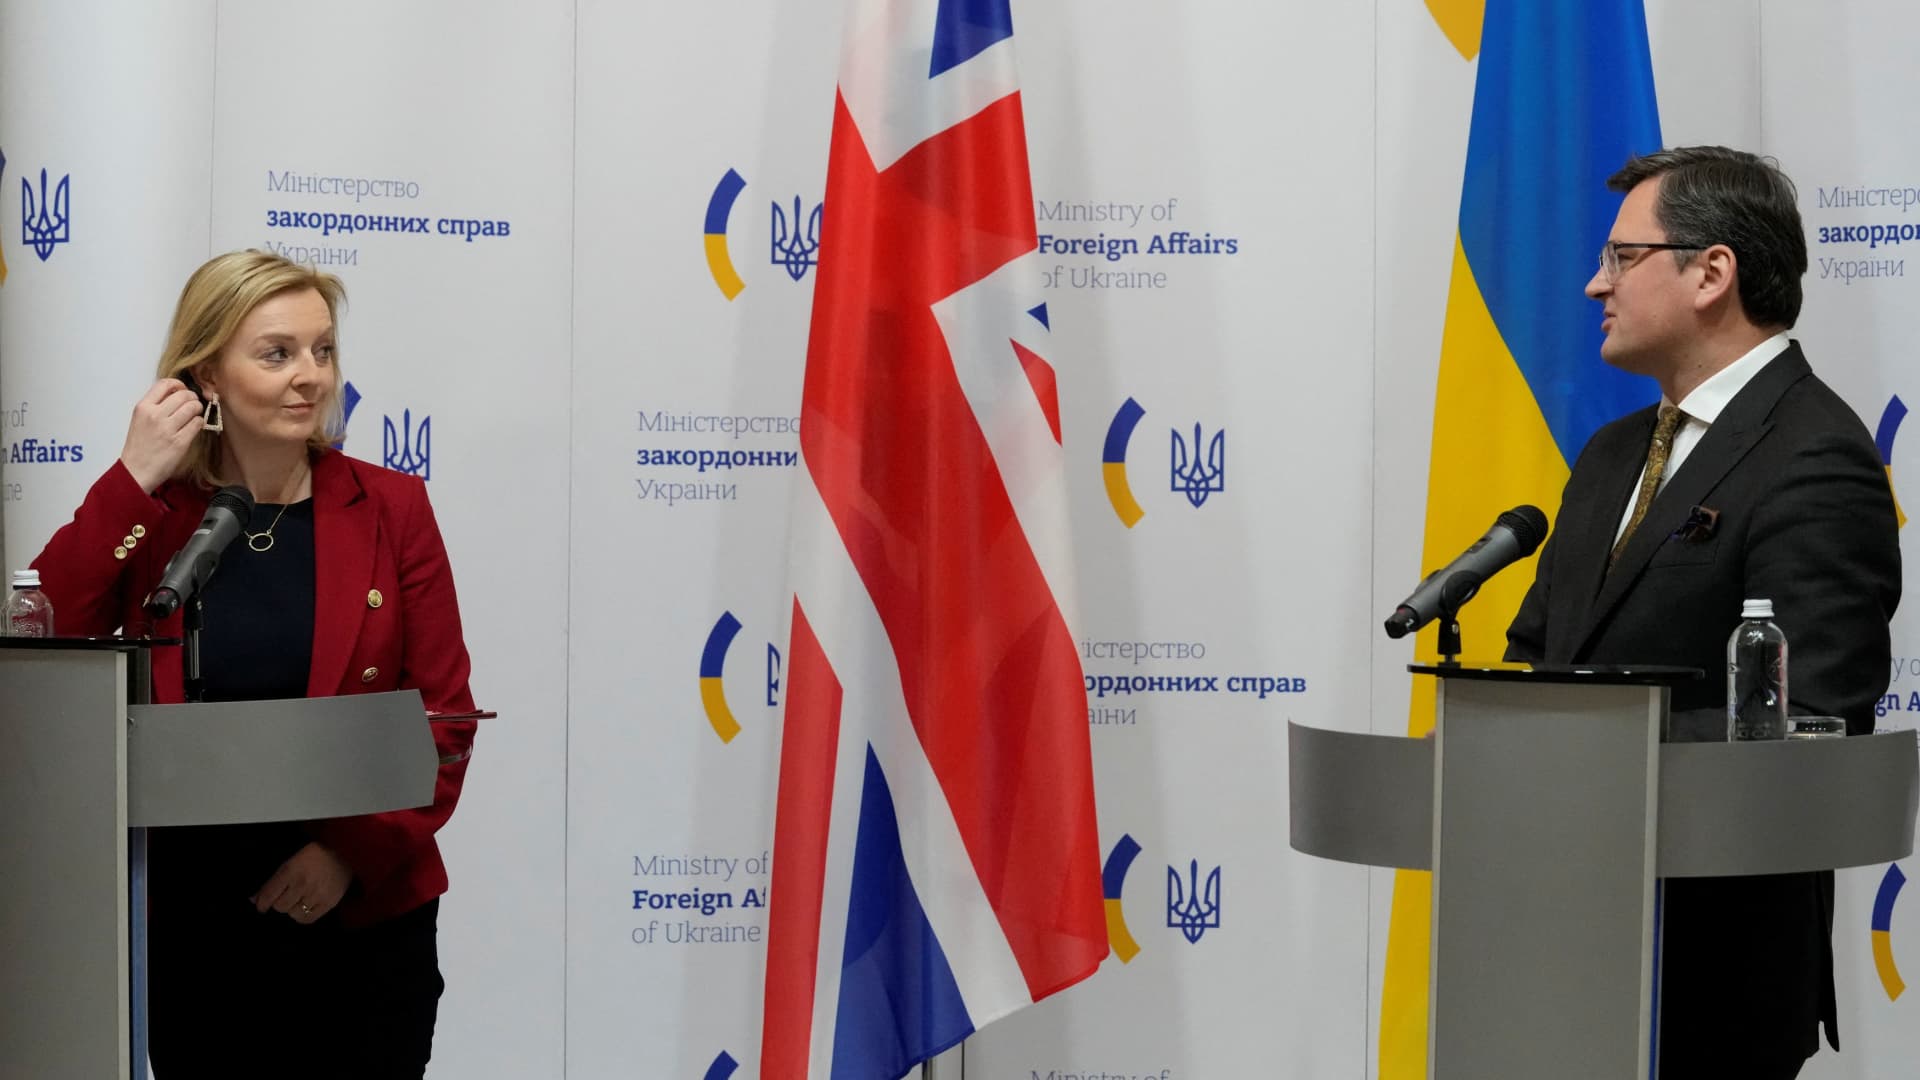 British Foreign Secretary Liz Truss and Ukrainian Foreign Minister Dmytro Kuleba attend a news conference following their talks in Kyiv, Ukraine, February 17, 2022.